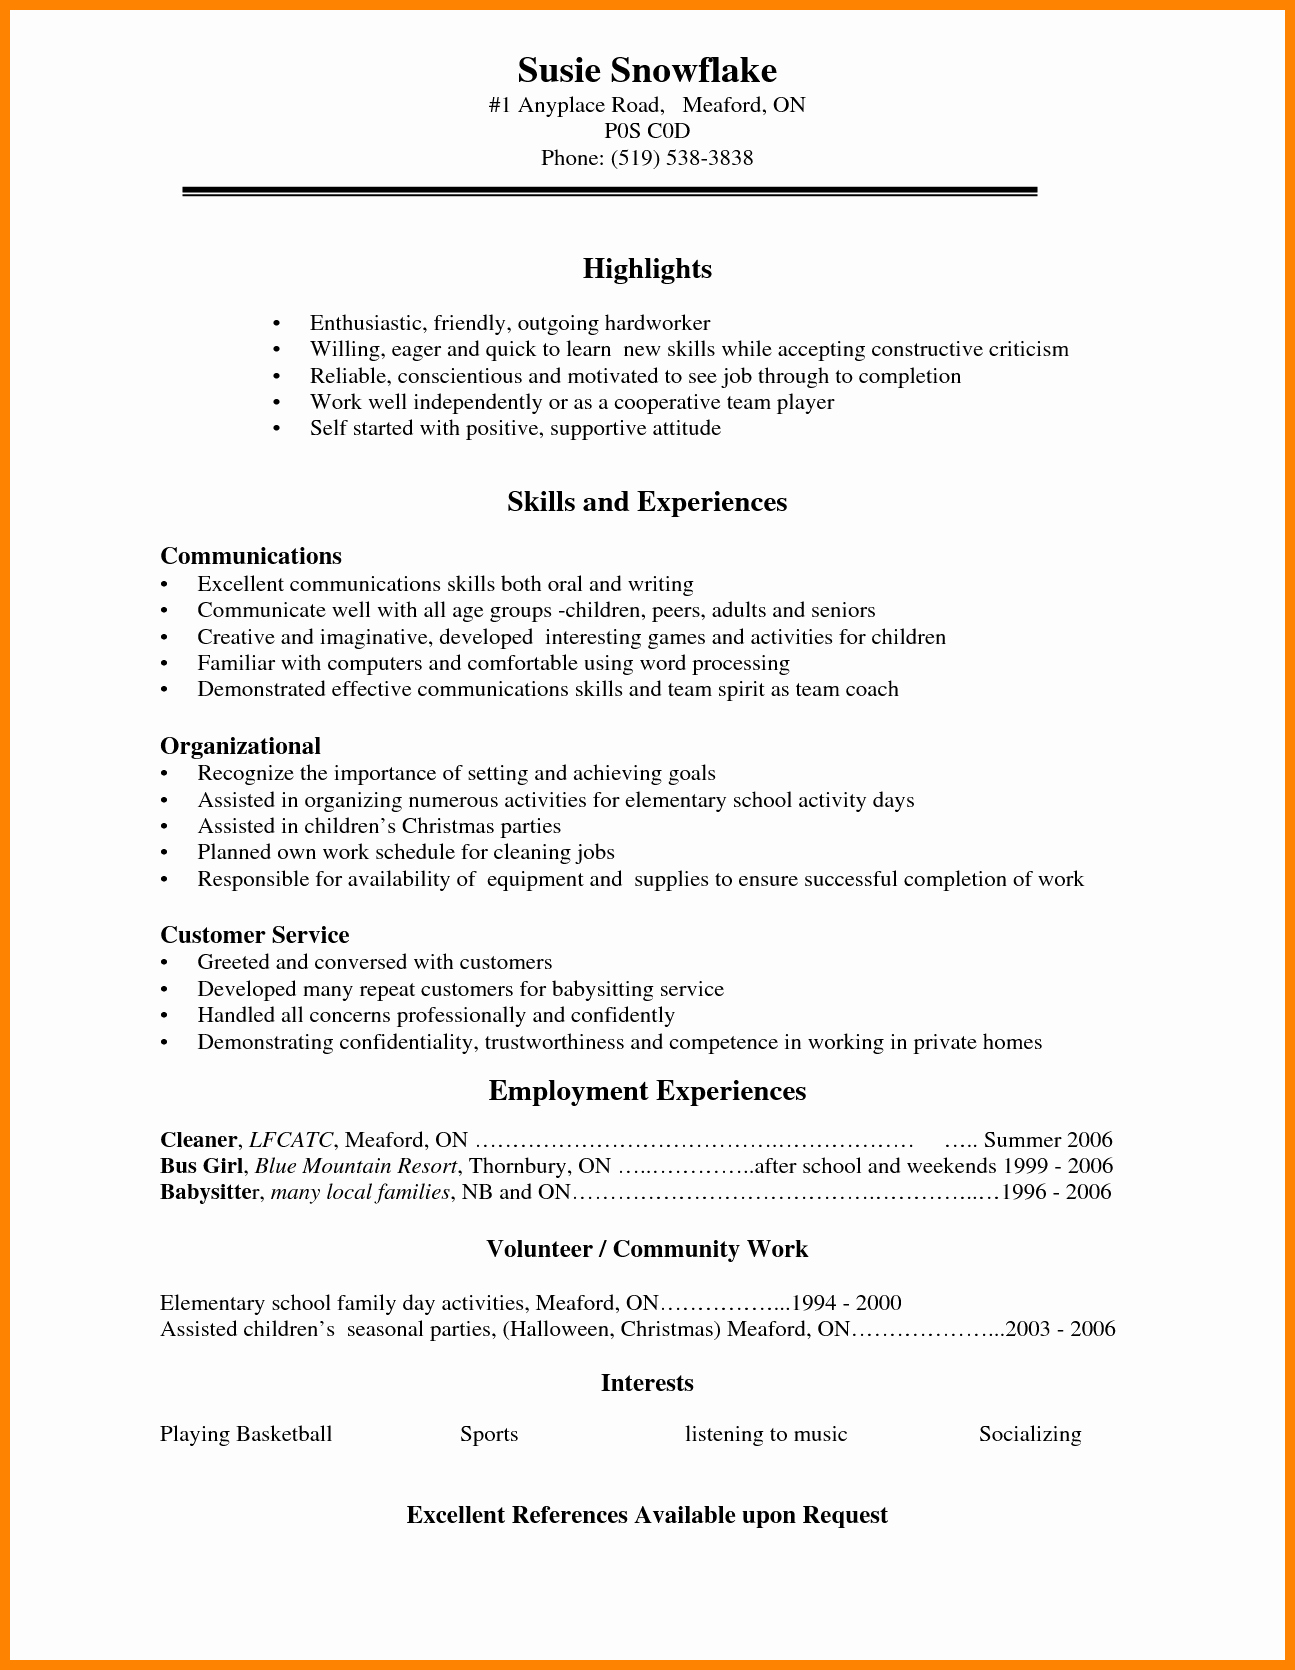 Resume Examples for Highschool Students Fresh 5 Cv Template for High School Students